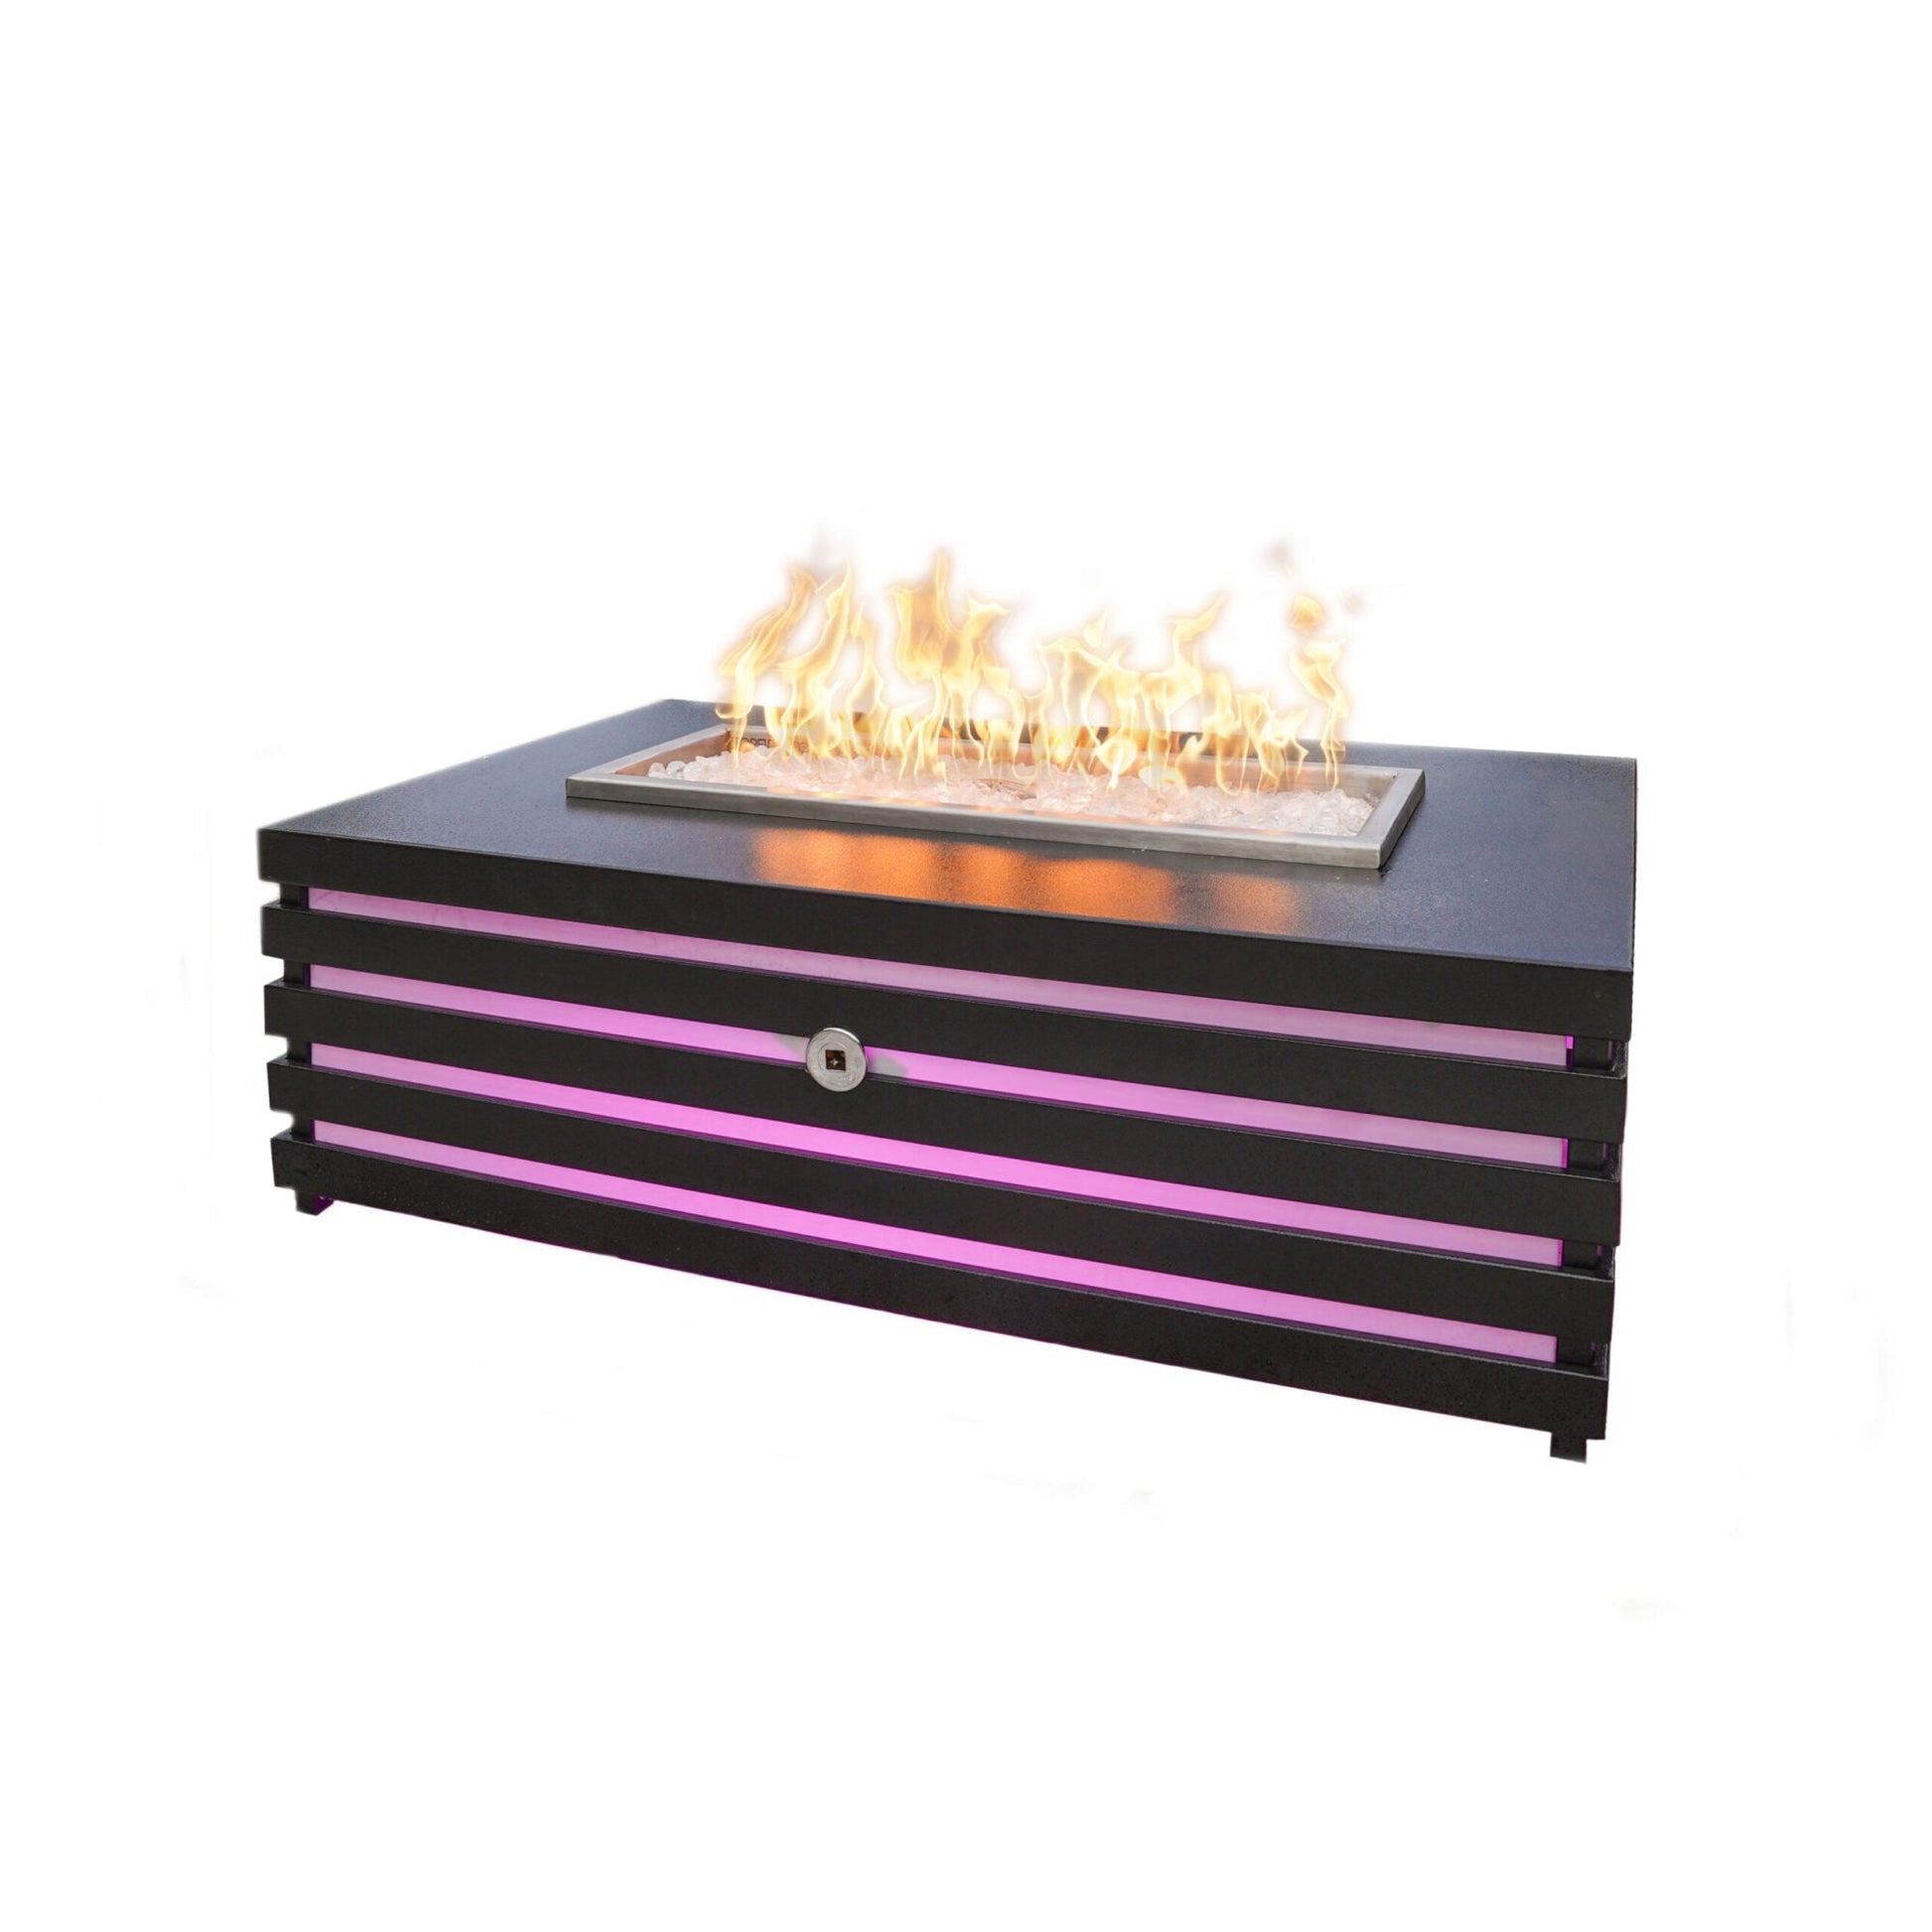 The Outdoor Plus Amina 48" Black Powder Coated Natural Gas Fire Pit with 110V Electronic Ignition